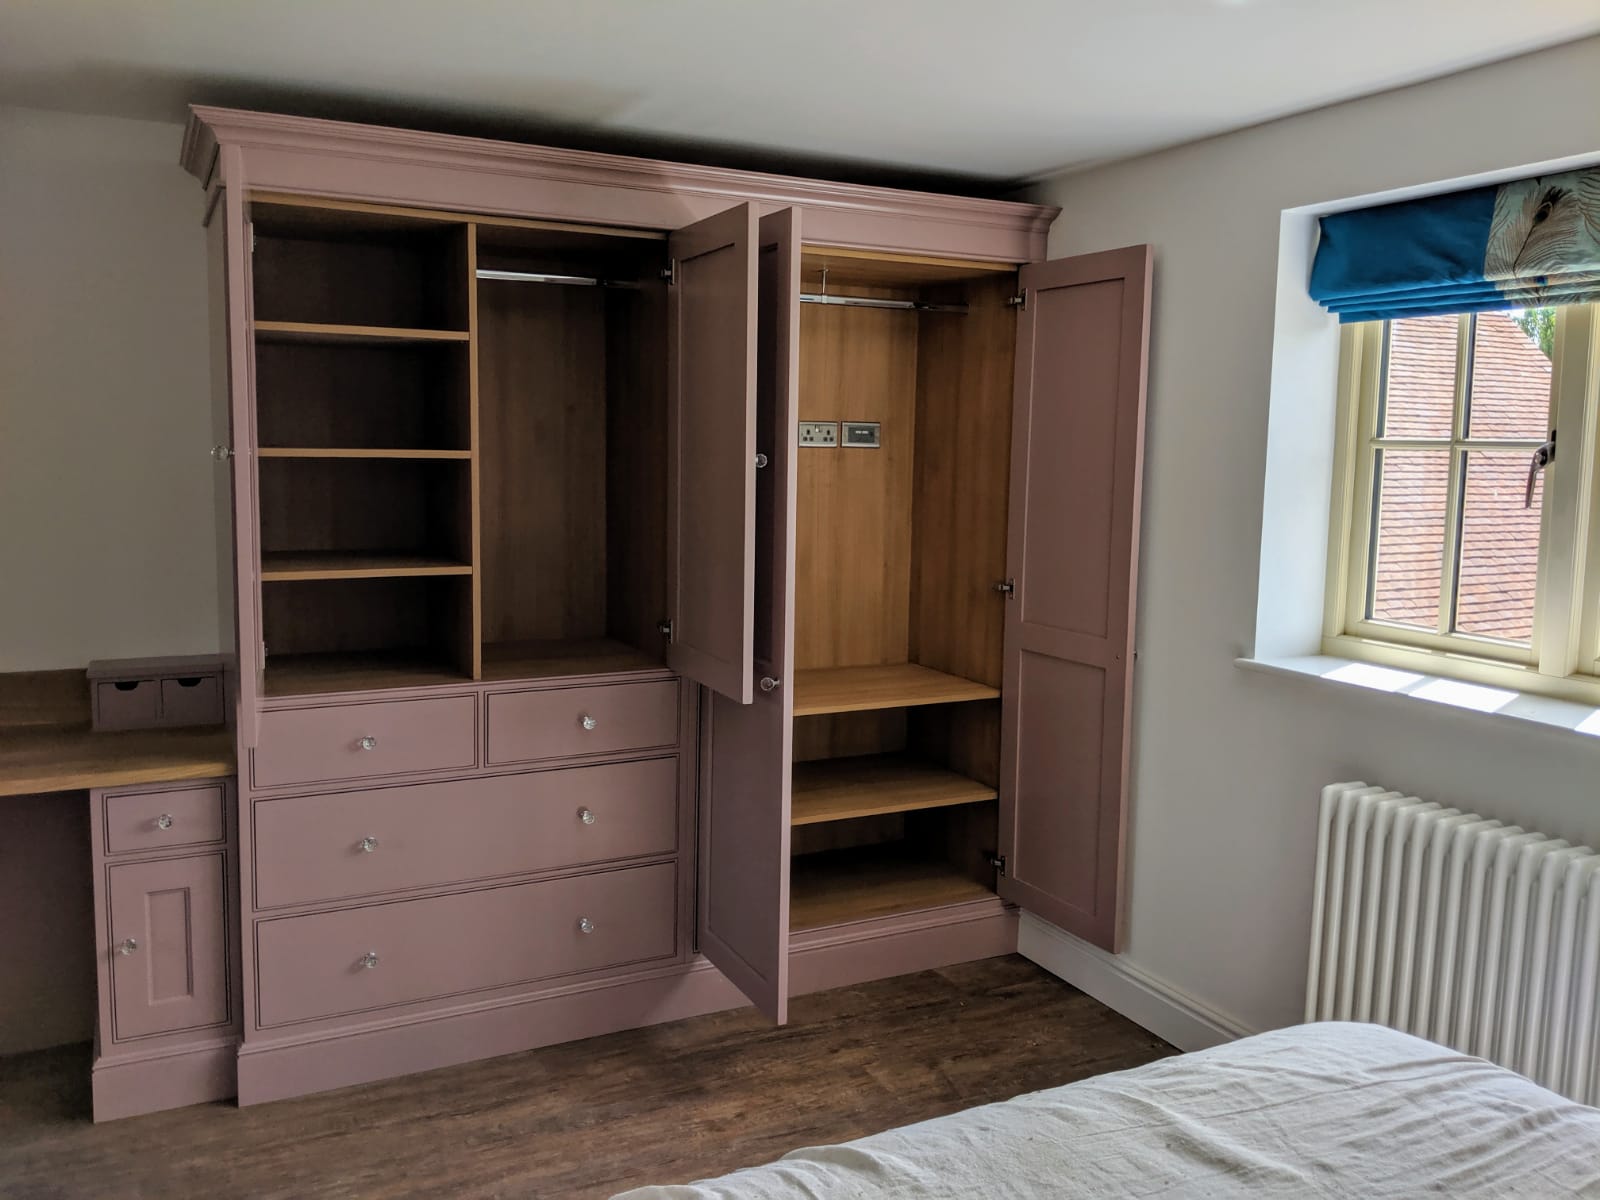 Bespoke Fitted Bedroom Furniture from Knights Country Kitchens